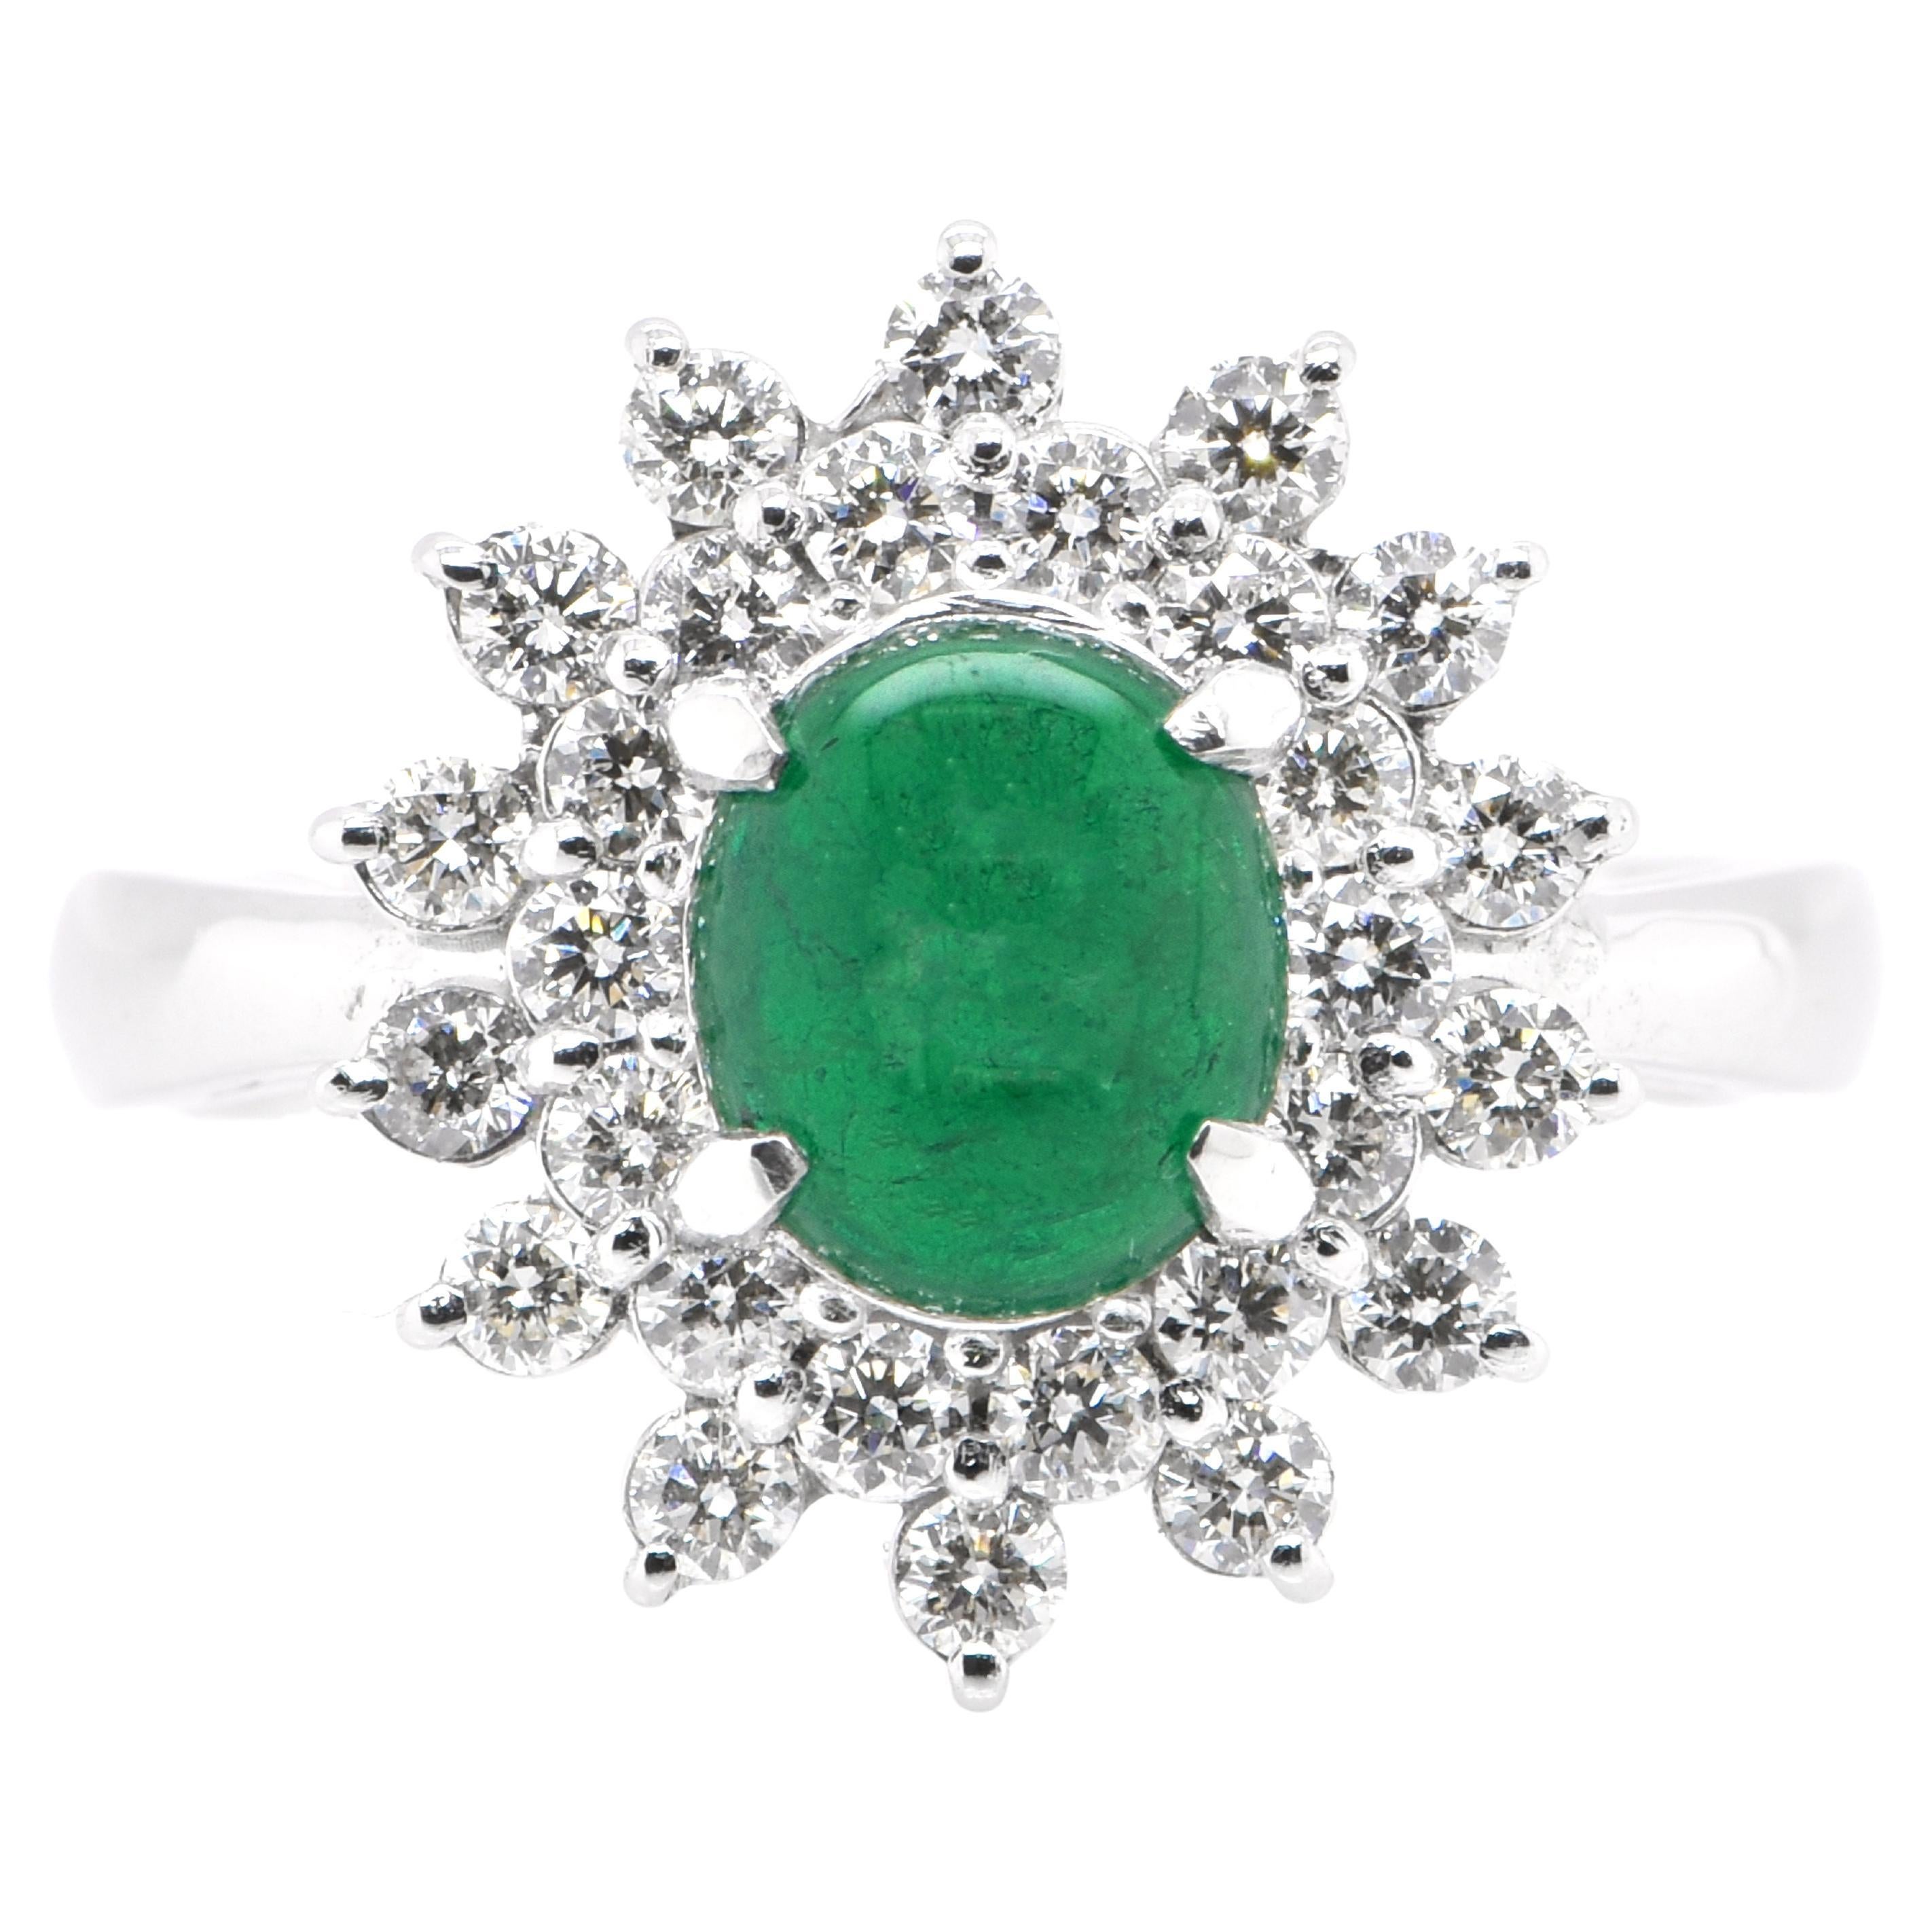 1.17 Carat Natural Emerald Cabochon and Diamond Ring Set in Platinum For Sale